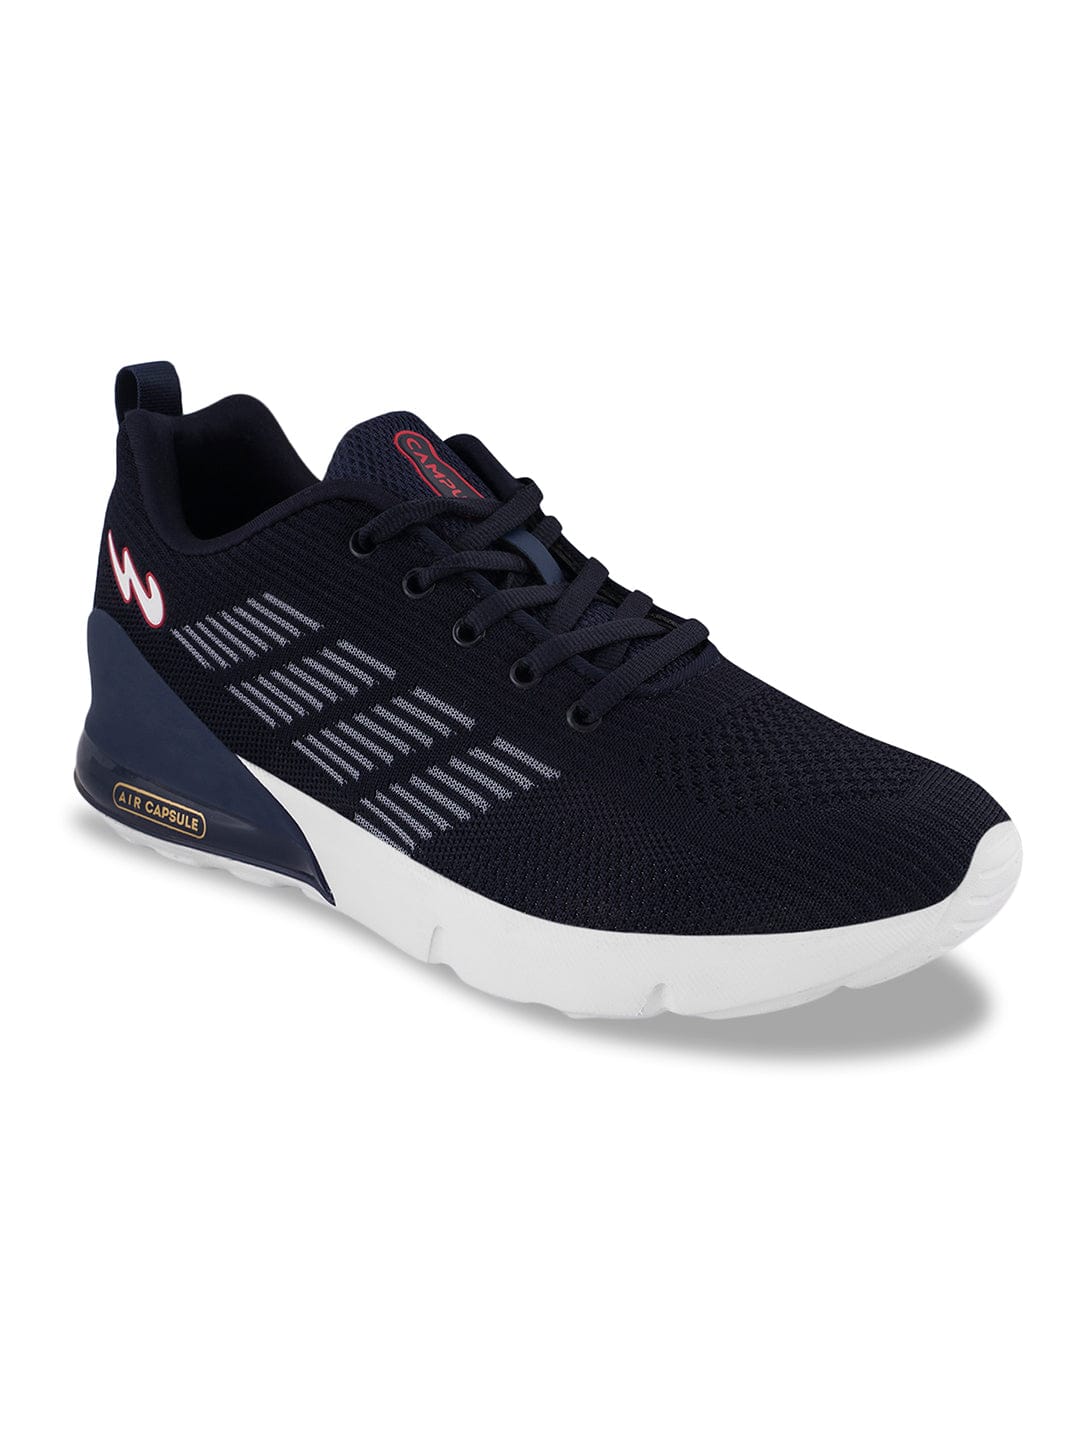 Buy Sports Shoes For Men: Soil-Navy-Red | Campus Shoes